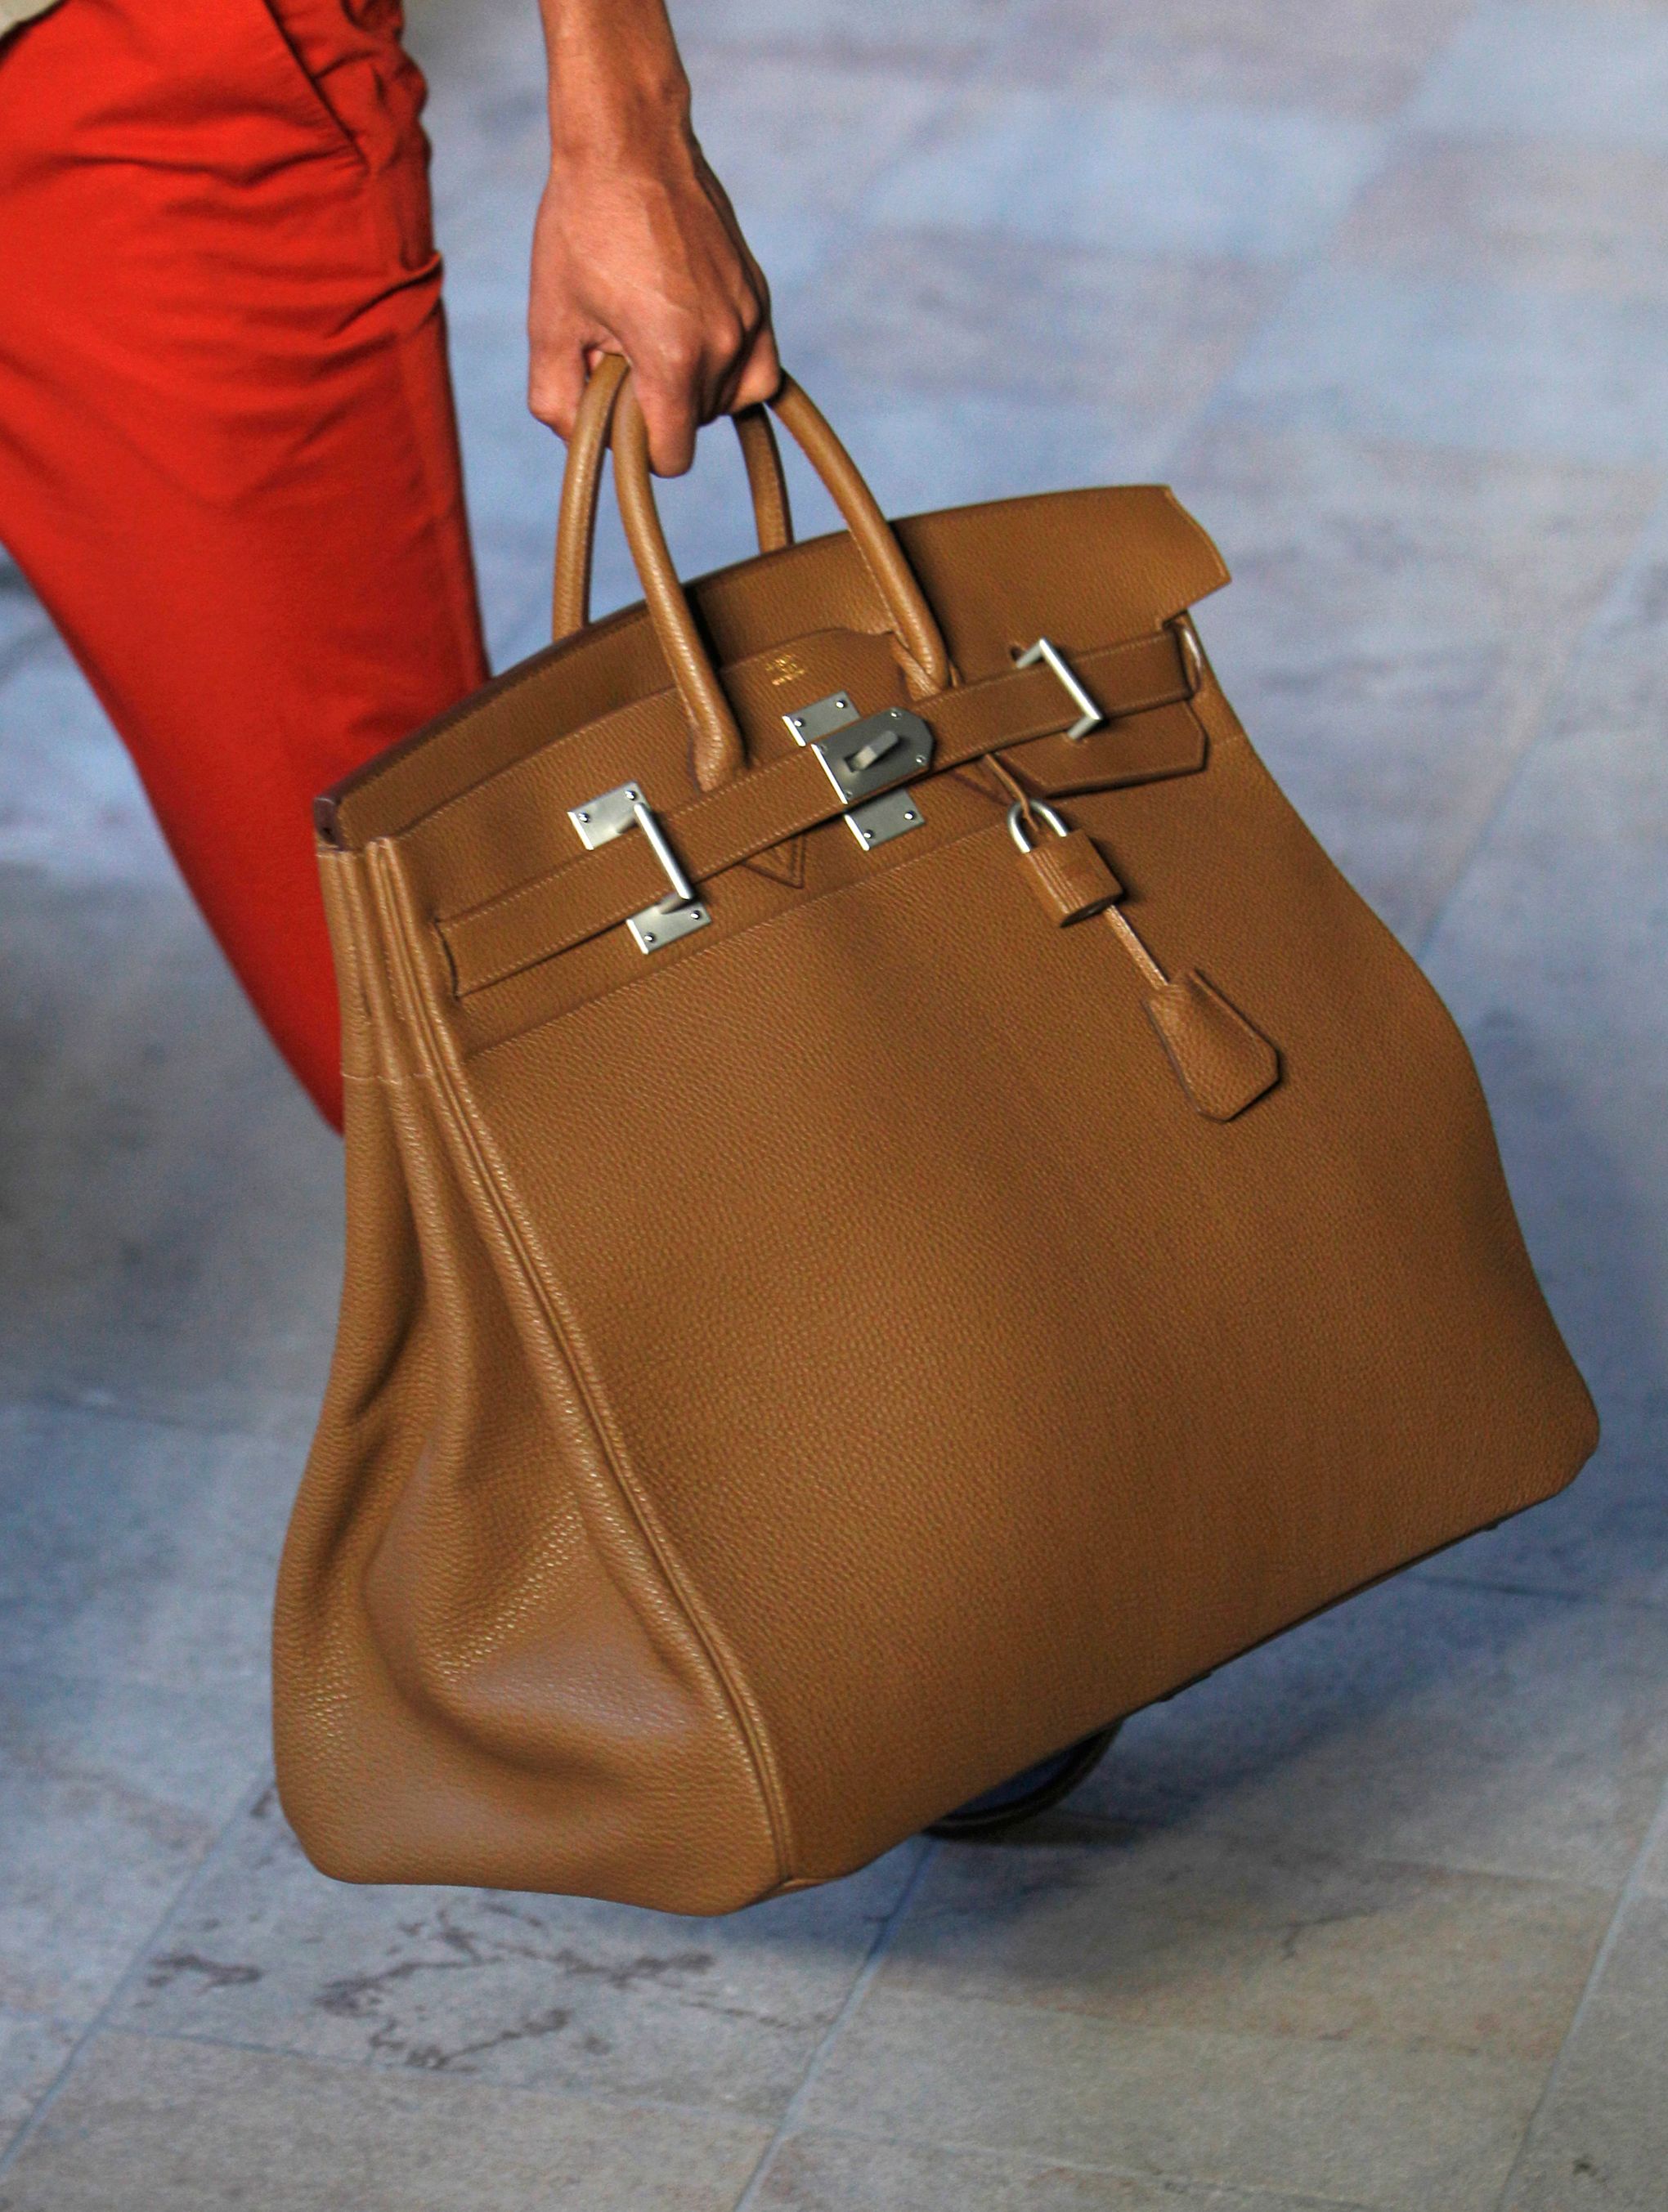 The Best Replica Hermes Kelly Cut handbags Discount Price Is Waiting For You